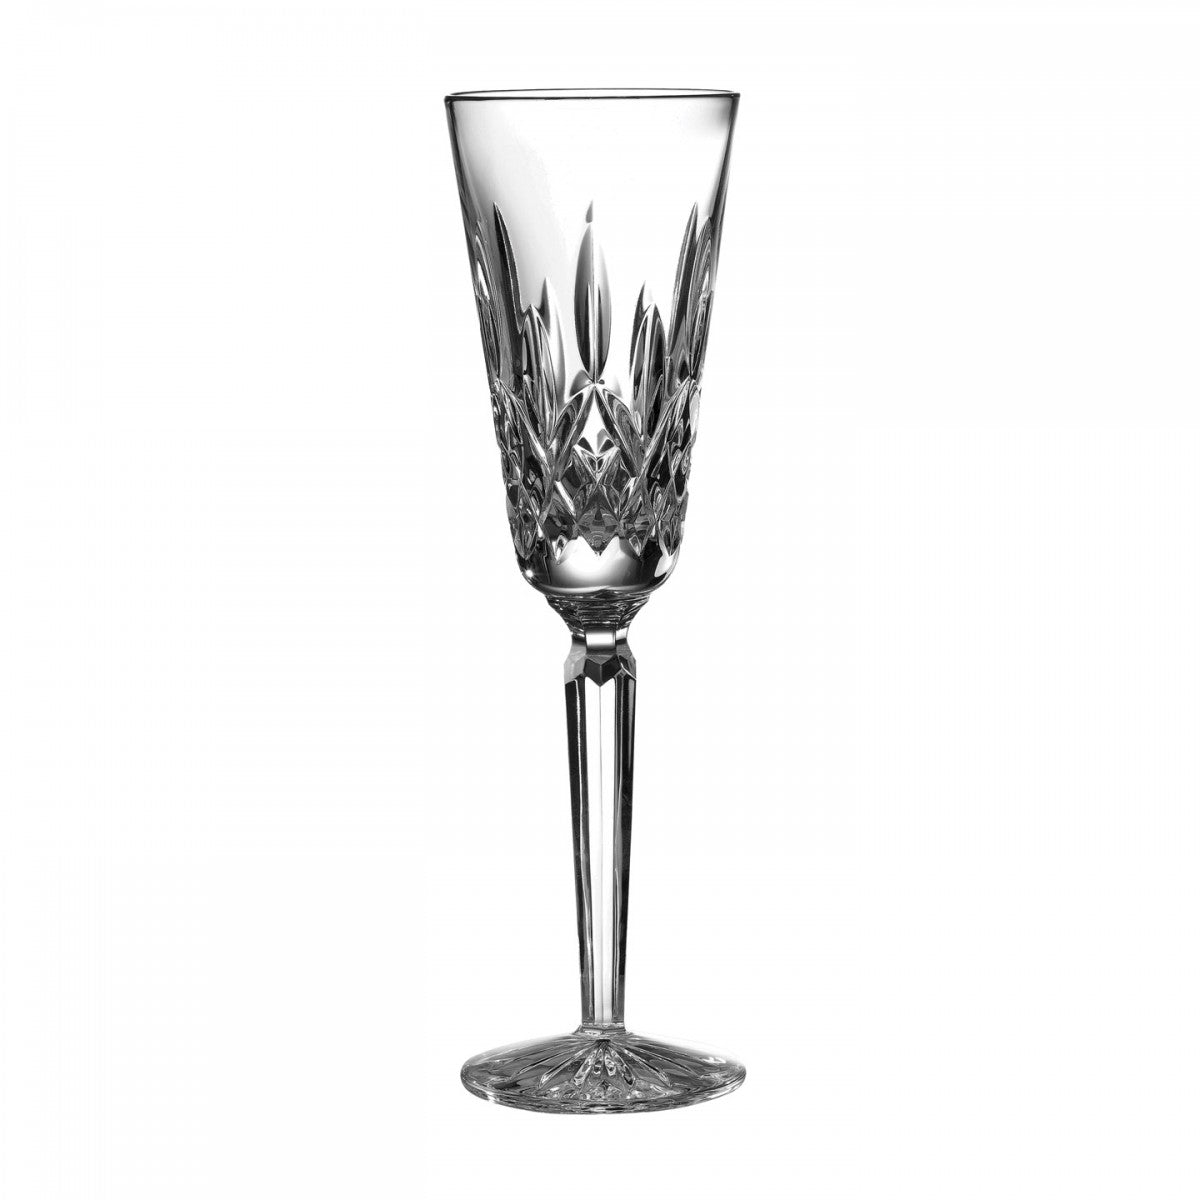 Waterford Lismore Tall Champagne Flute, 4 oz